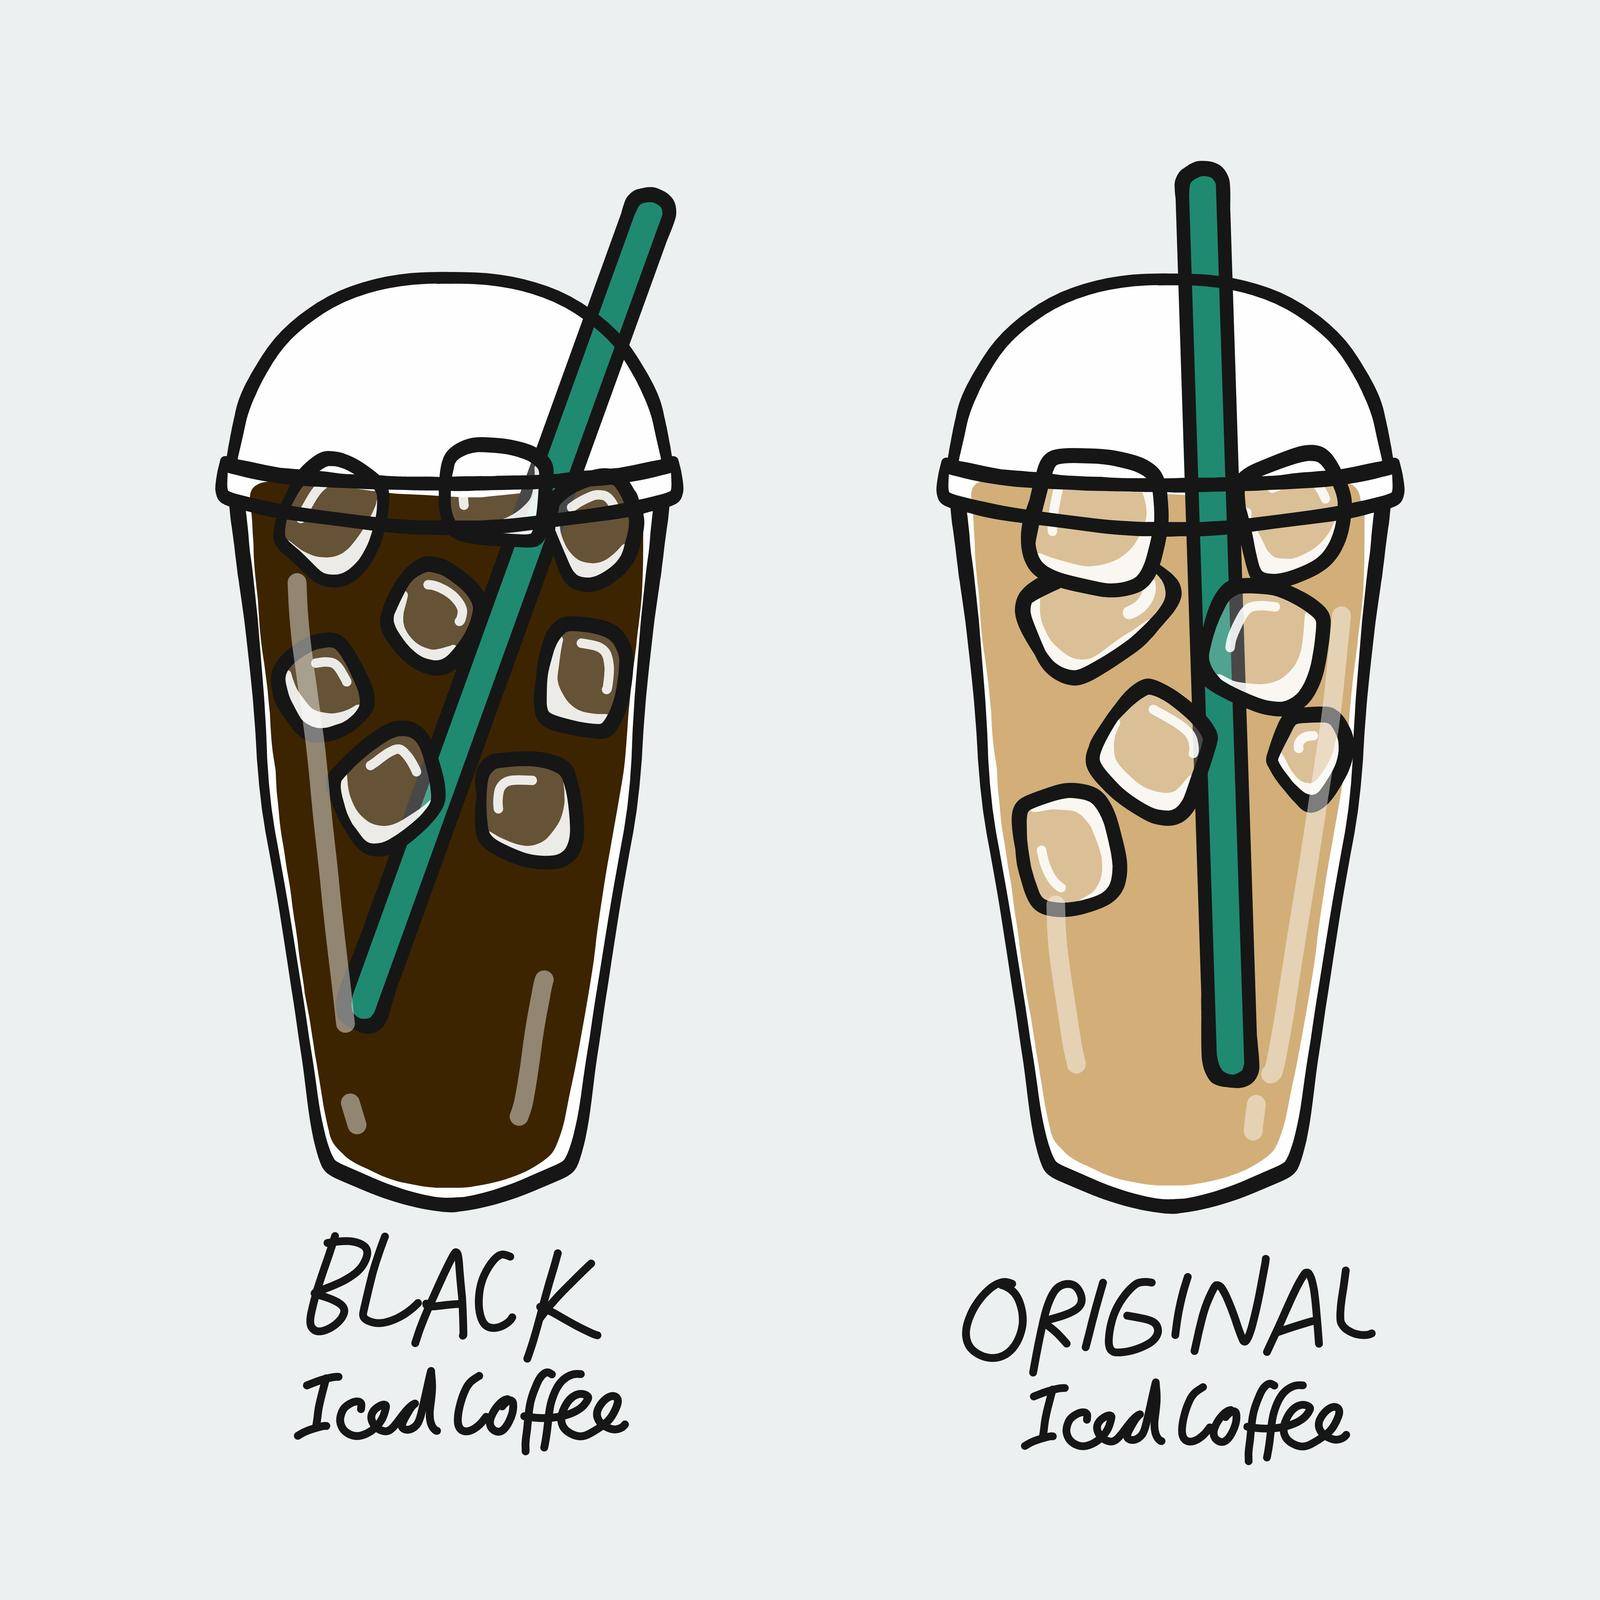 Black iced coffee cup and Original iced coffee cup cartoon vector illustration by Yoopho